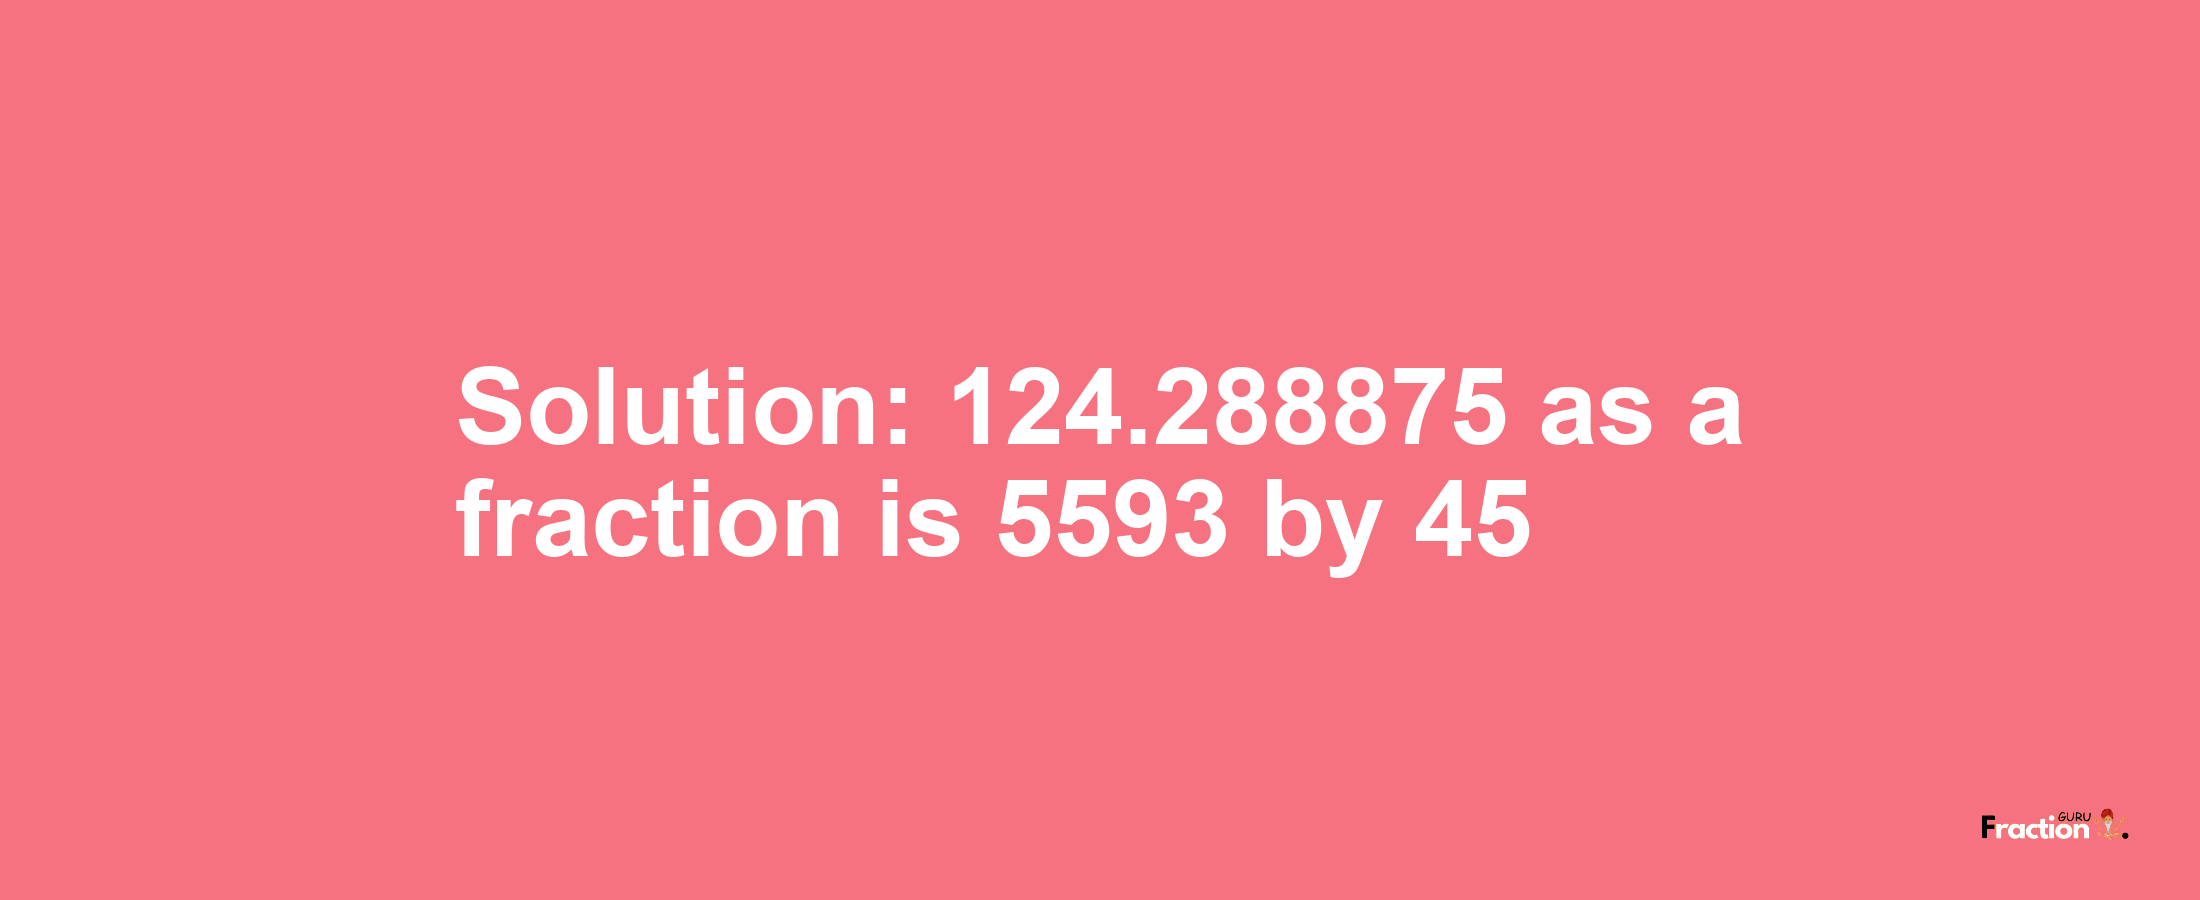 Solution:124.288875 as a fraction is 5593/45